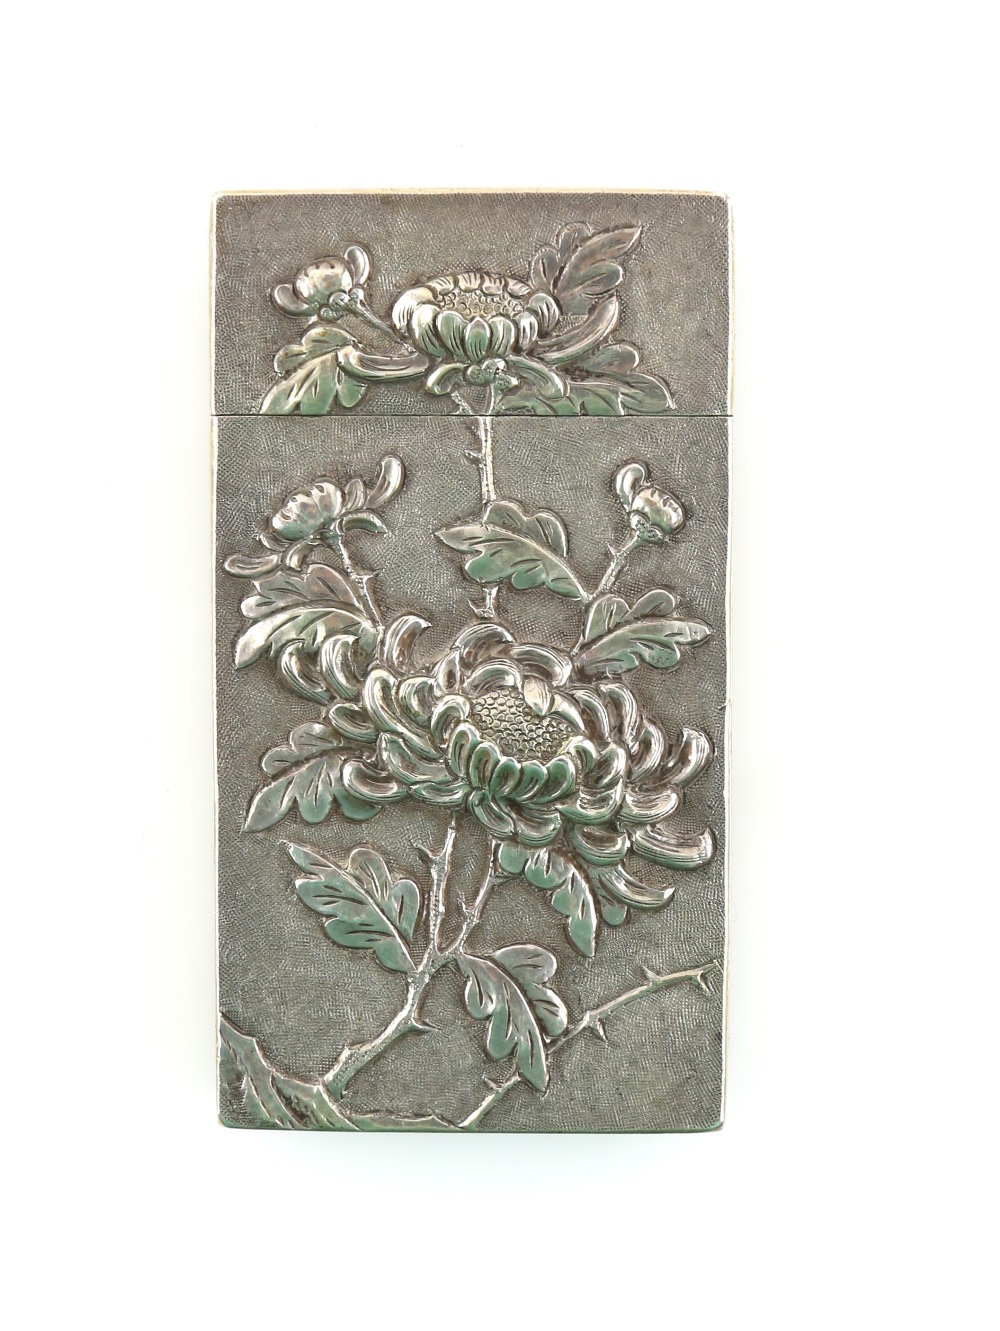 Chinese silver card case decorated with flowers and foliage in relief, the reverse with bamboo, 8.